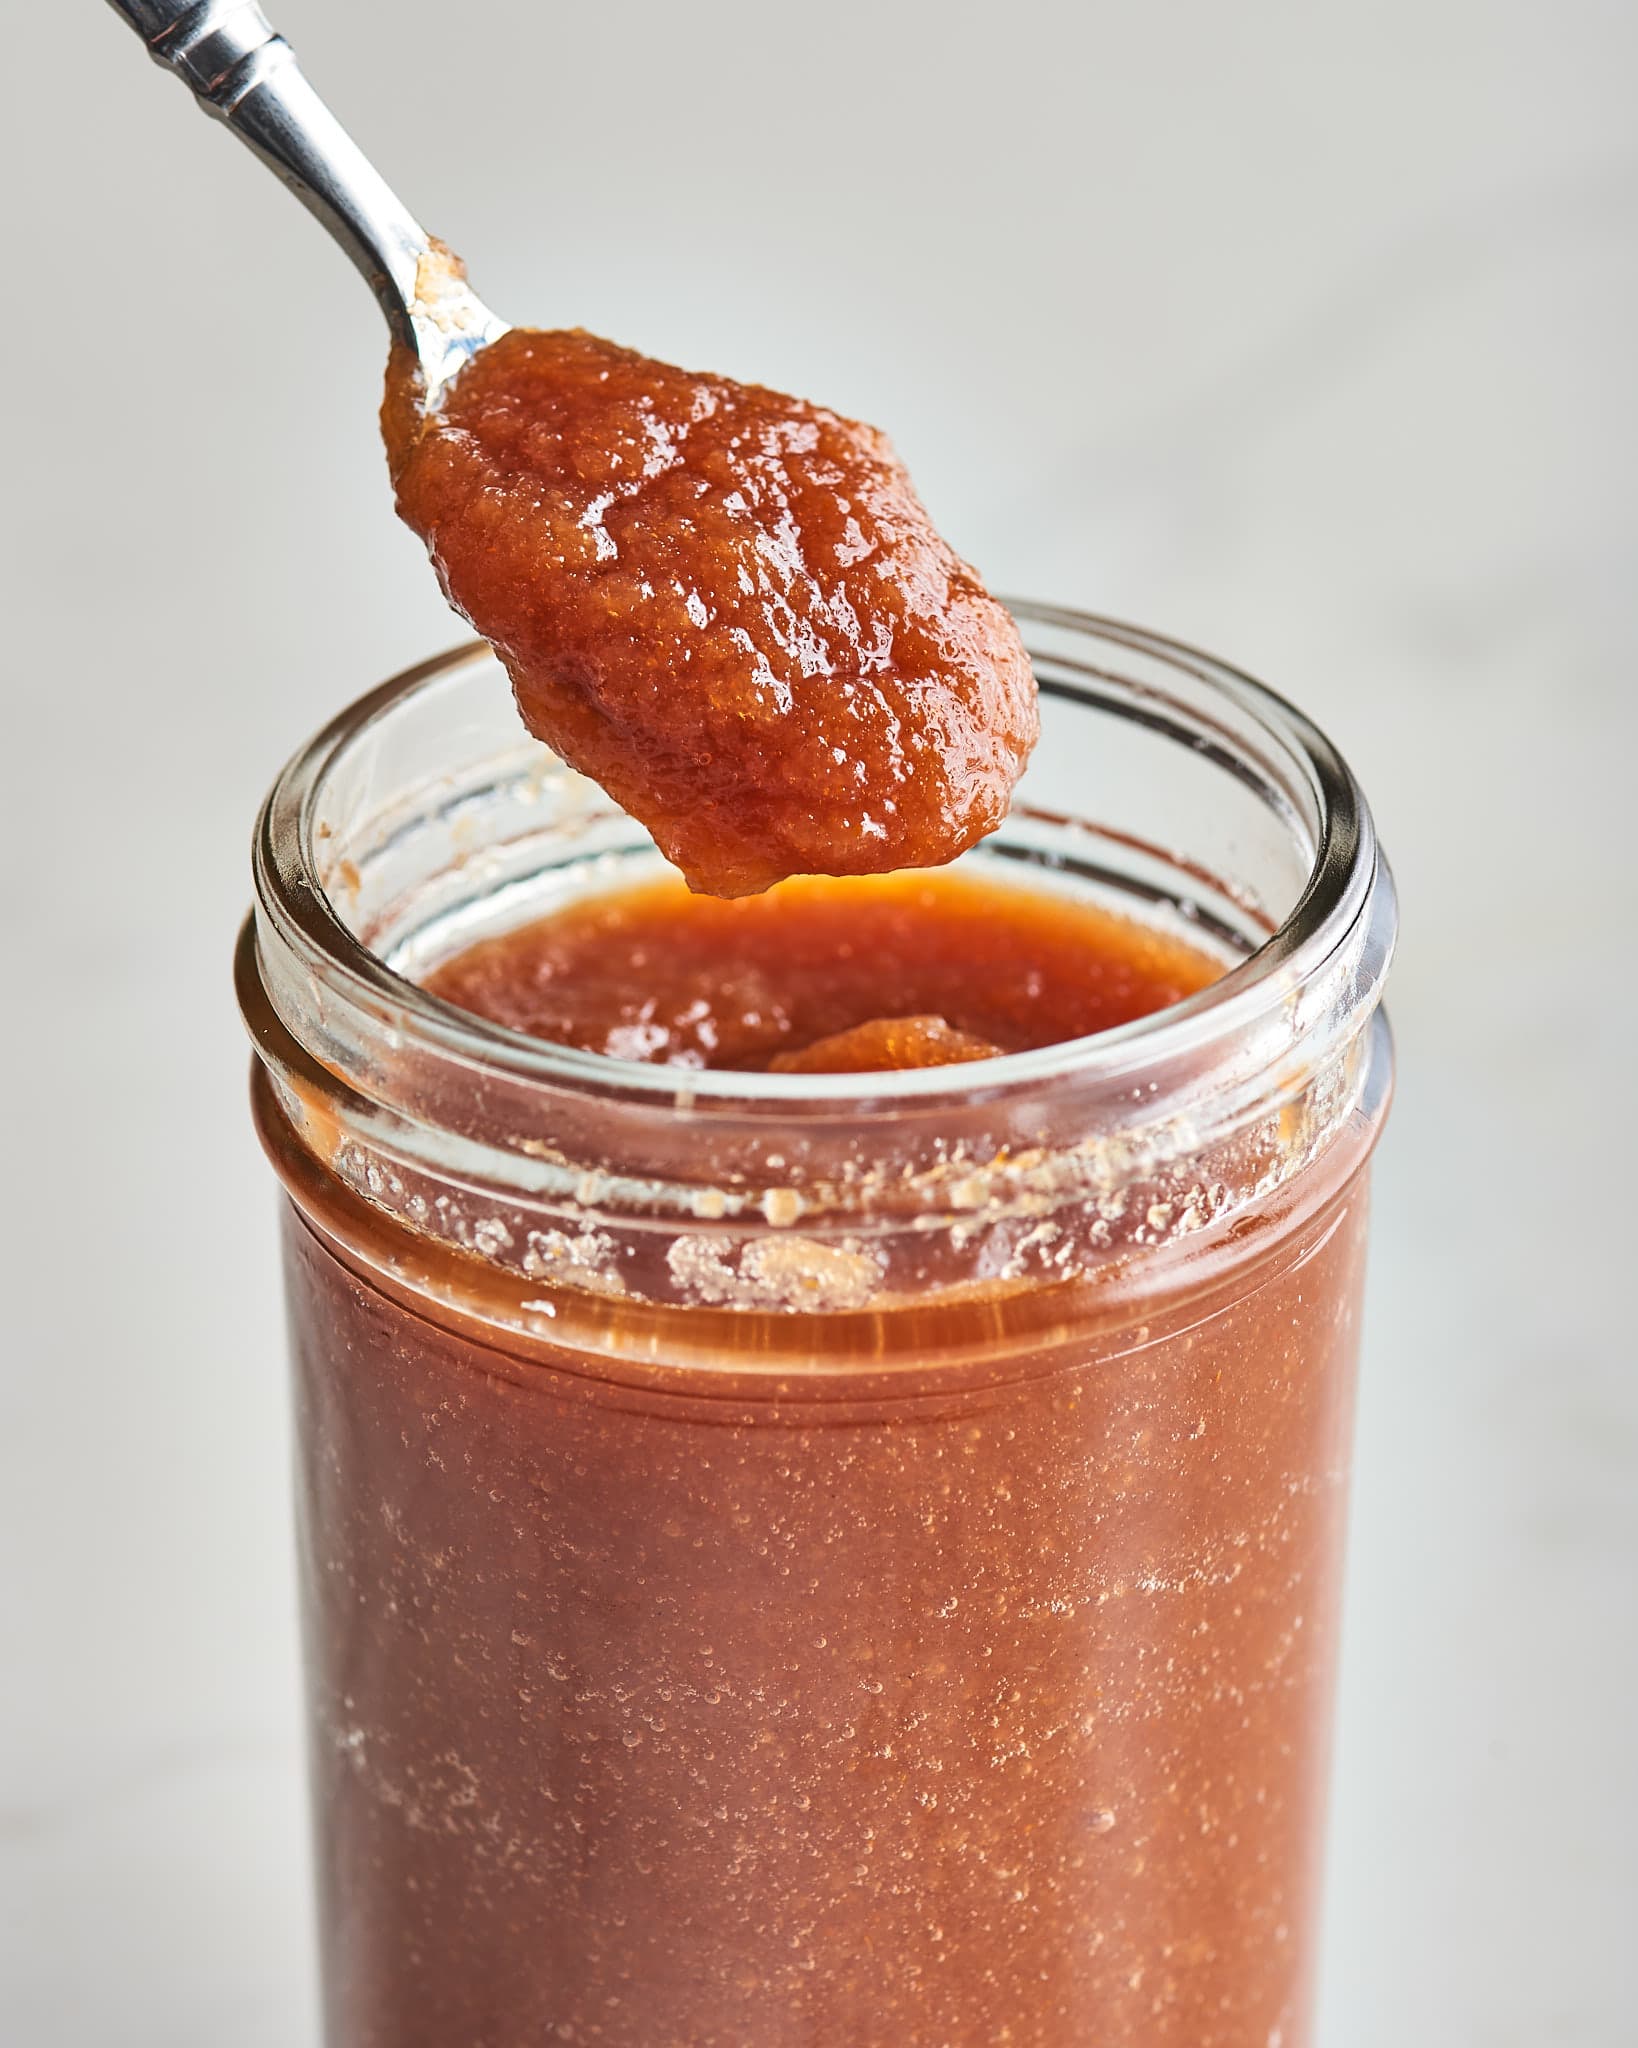 This Blender BBQ Sauce Is Unbelievably Easy And Delicious